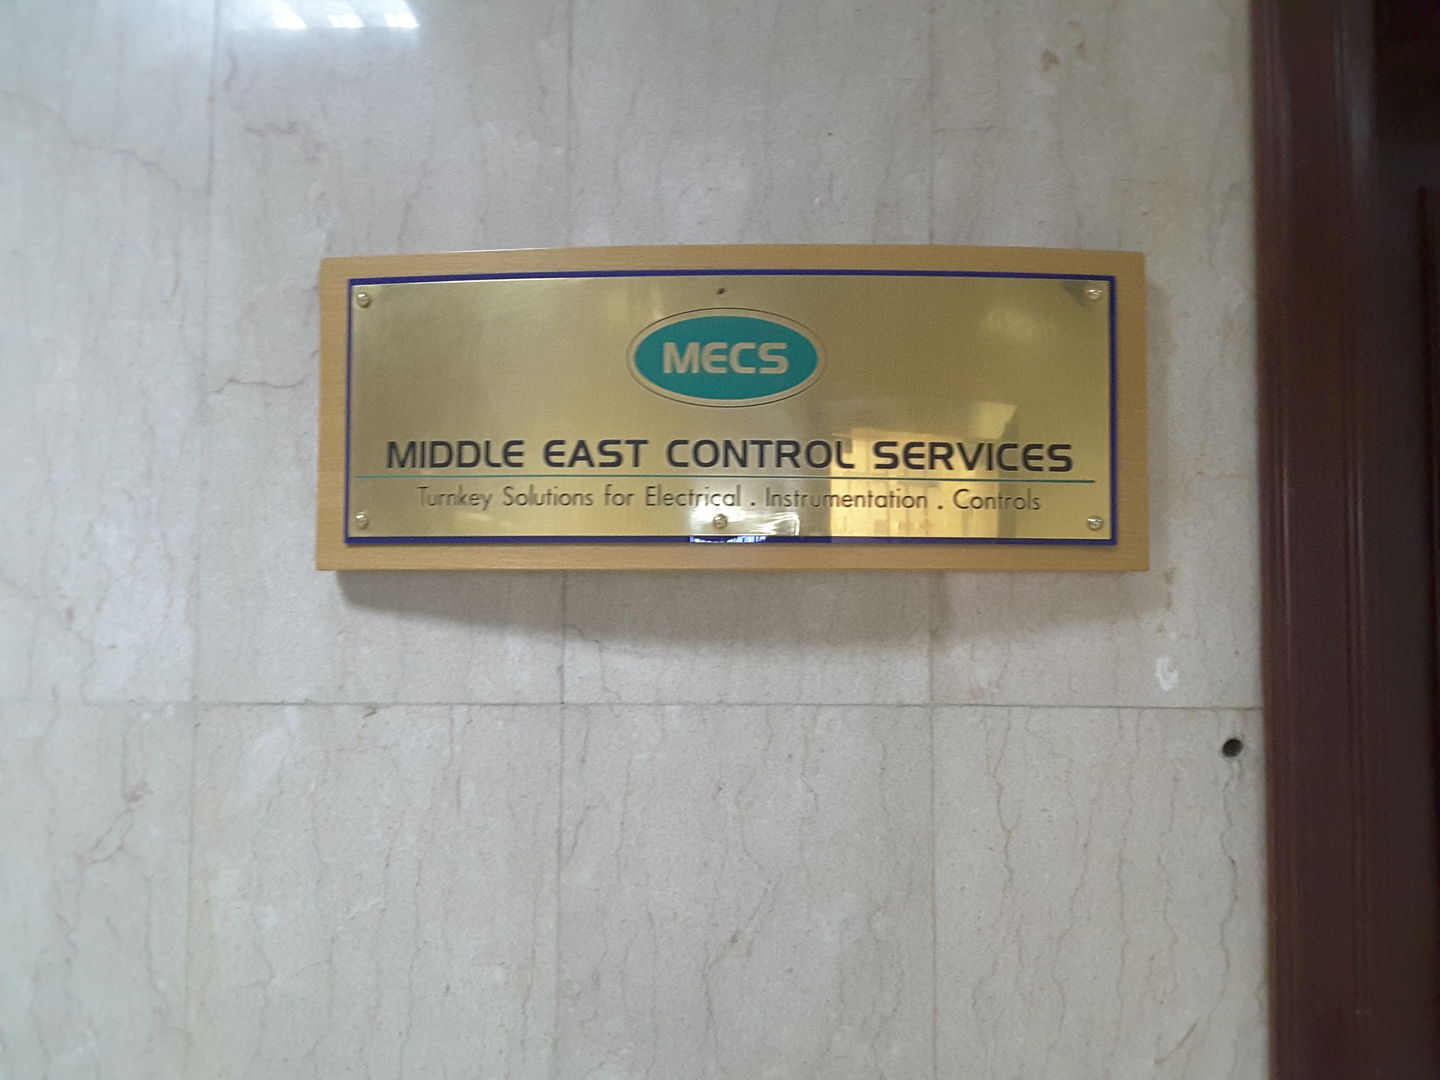 Middle East Control Services